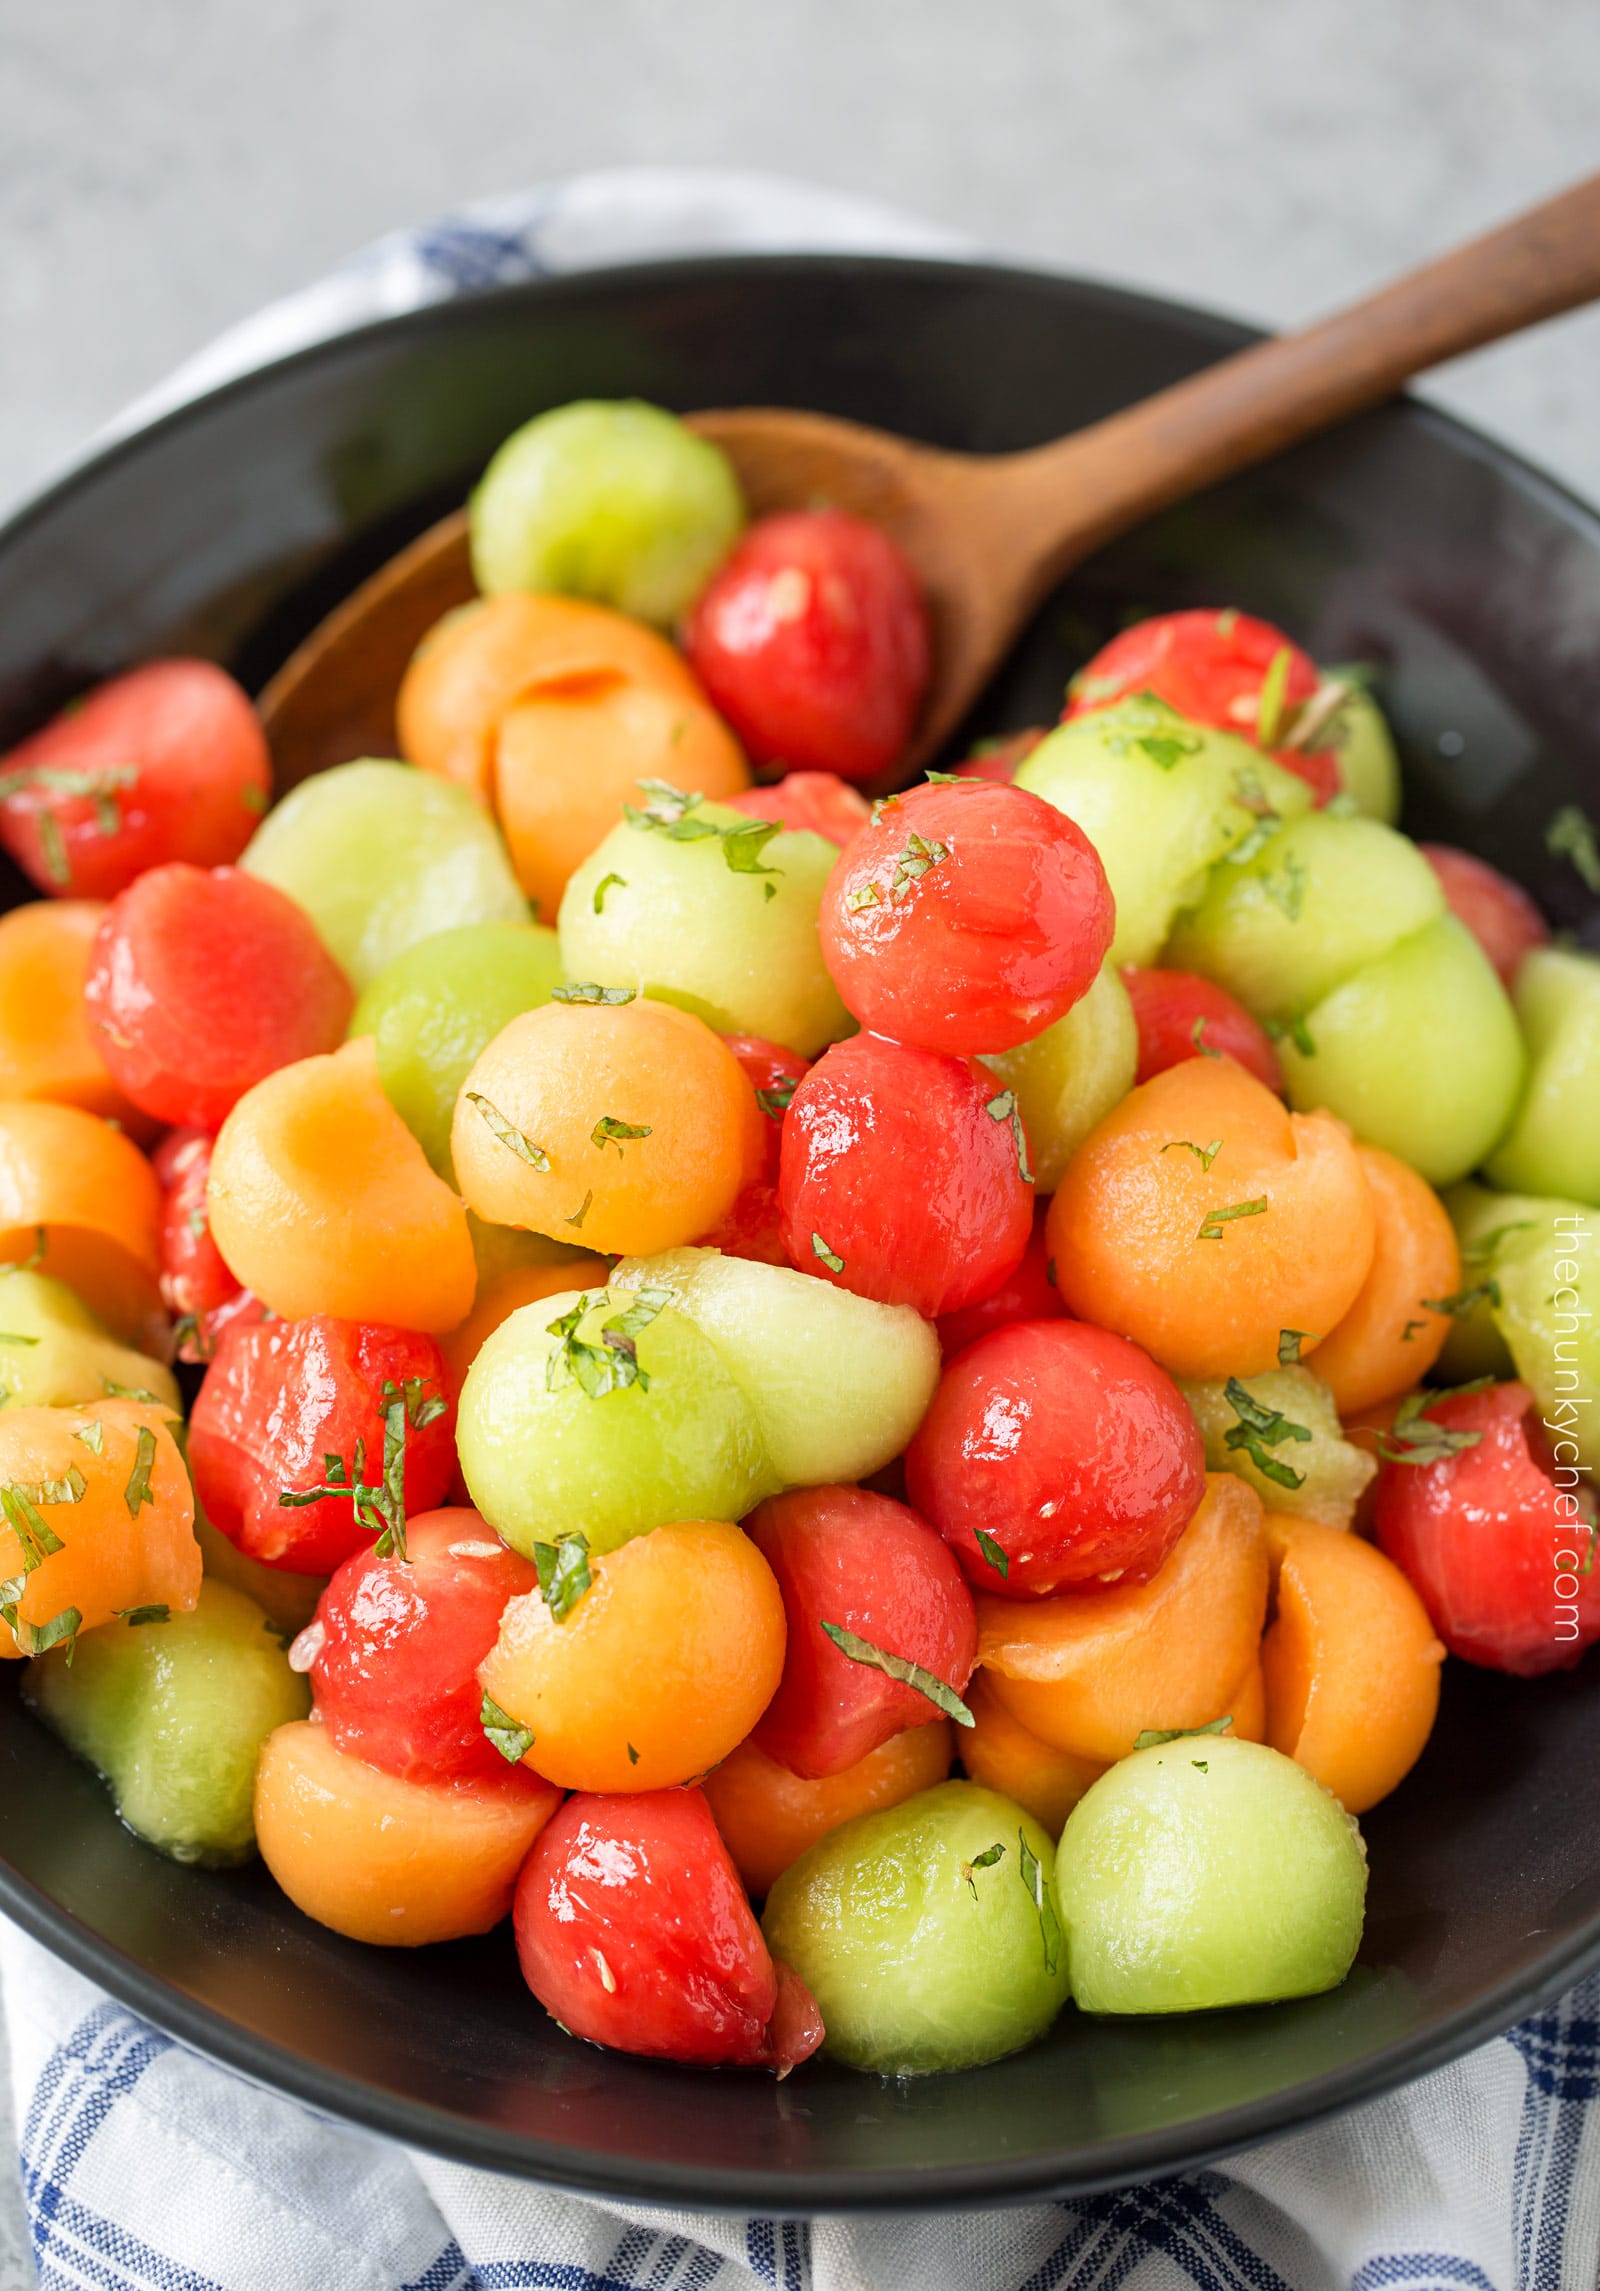 Summer Fruit Salad with Serrano Mint Syrup | A refreshing fruit salad made with a variety of summer fruits, tossed in an easy simple syrup made with mint and serrano pepper! | http://thechunkychef.com